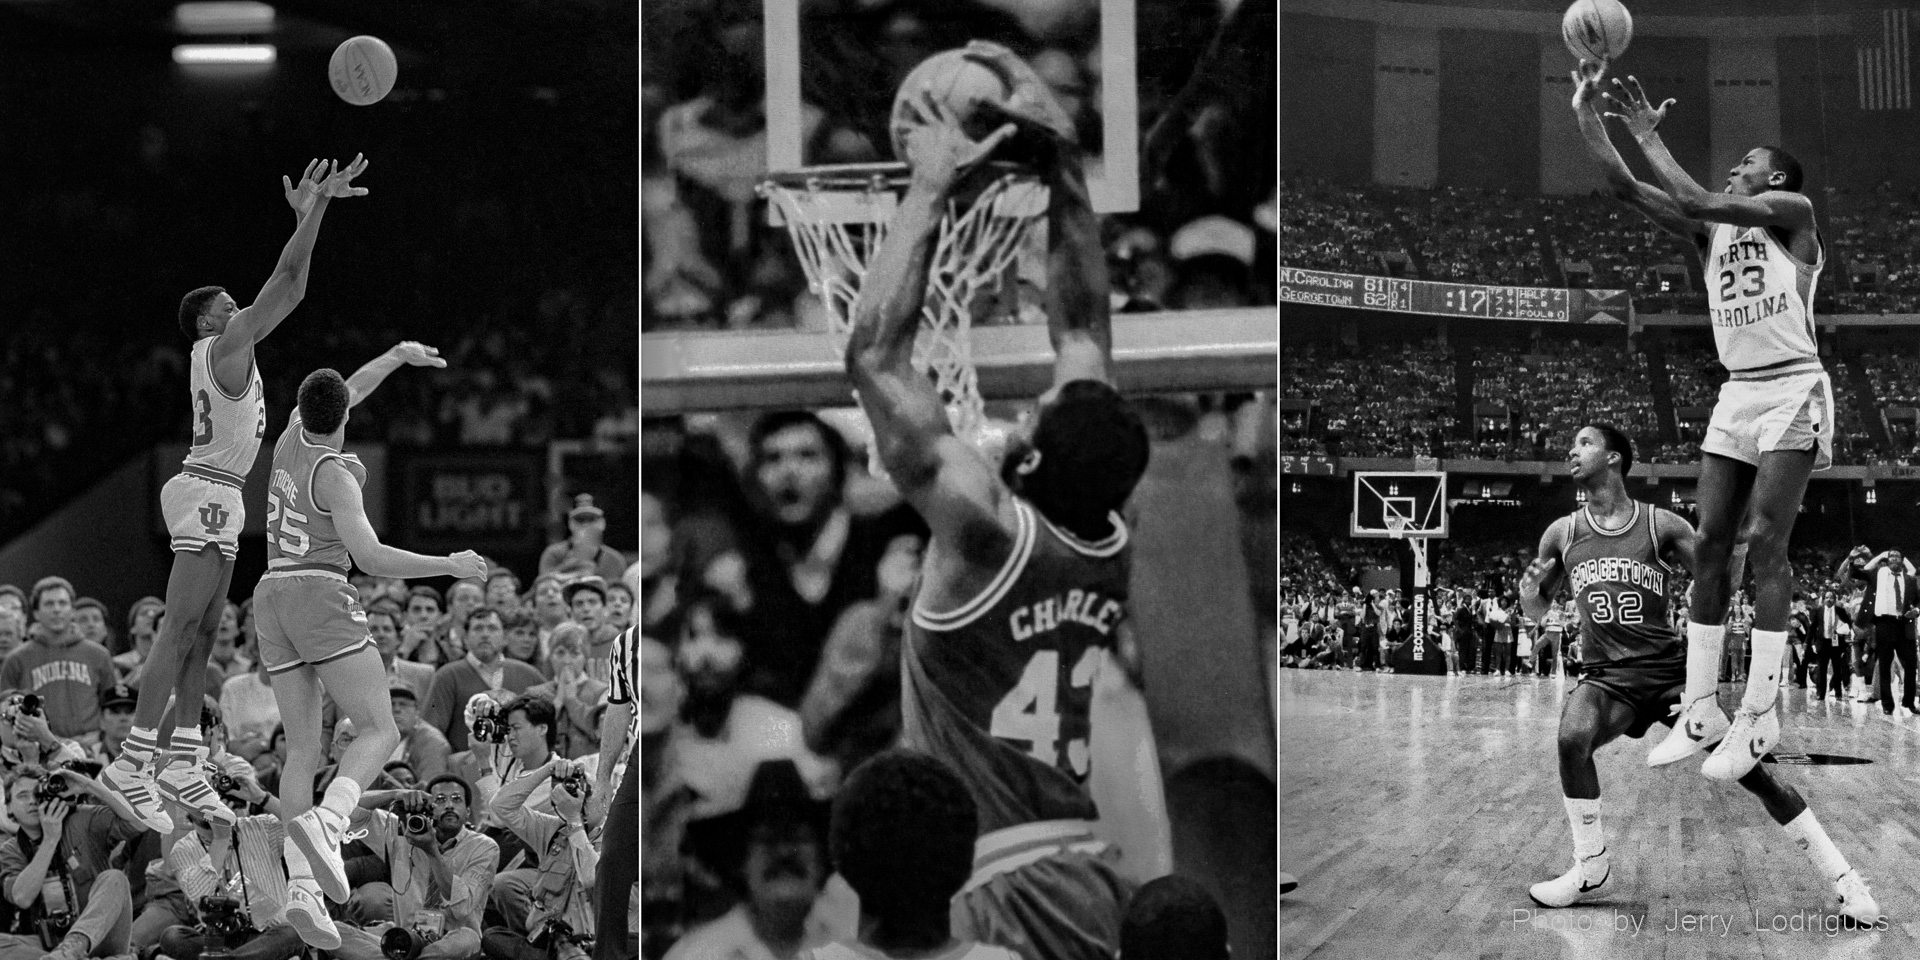 Left: Keith Smart hits the game-winning 16-foot jump shot from the left side with five seconds remaining to give Indiana a 74-73 victory over Syracuse in the NCAA men's basketball championship game in New Orleans on March 30, 1987. <br /><br />Center: North Carolina State's Lorenzo Charles dunks the ball at the buzzer to beat Houston 54-52 to win the NCAA Men's basketball tournament national championship. Charles grabbed an errant 30-foot desperation shot by Dereck Whittenburg which missed the rim and put it in to win it for the Wofpack in Albuquerque, New Mexico on April 4, 1983<br /><br />Right: With 17 seconds left, Michael Jordan hits the game-winning jump shot to beat Georgetown 63-62 and claim the 1982 NCAA basketball national championship for North Carolina in New Orleans on March 29, 1982.